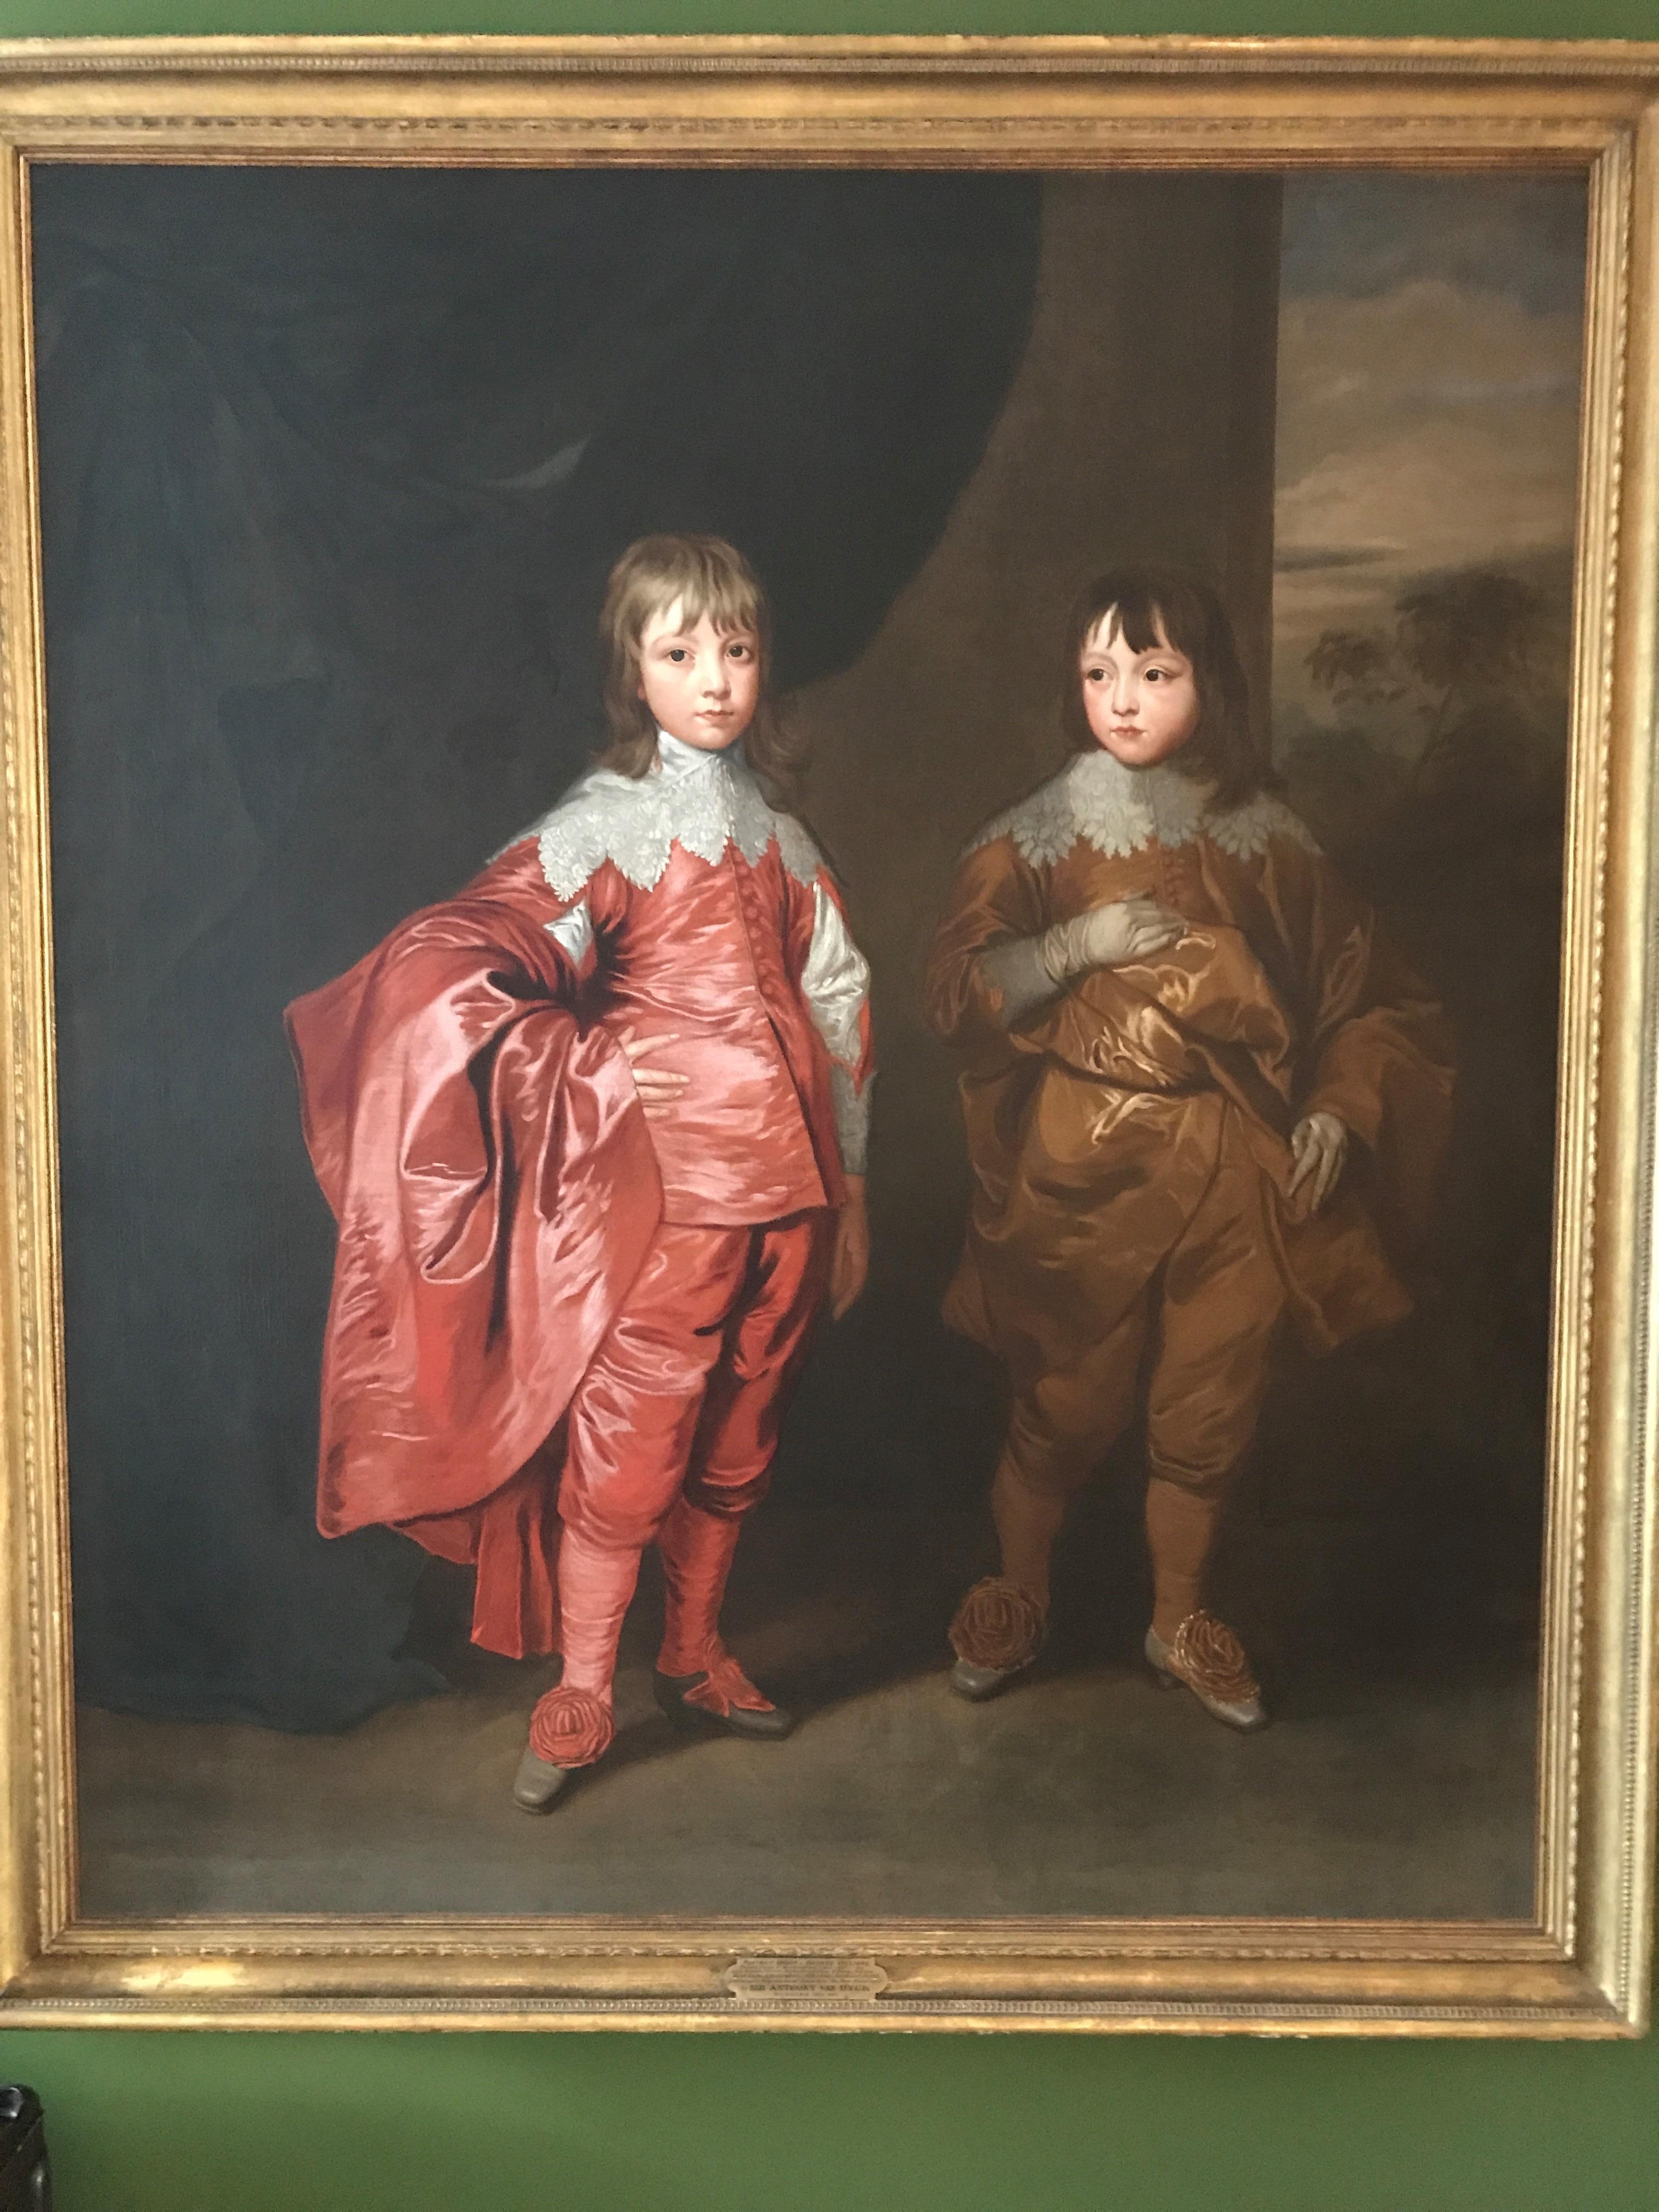 Aftrer Anthony VAN DYCK - maybe Studio (1599, Antwerp – 1641, London) Flemish
Double Portrait of George Villiers, 2nd Duke of Buckingham (1628-1687) & Lord Francis Villiers (1629-1648)
Oil on Canvas
170 x 147 cm



Anthony Van Dyck (1599-1641)
No